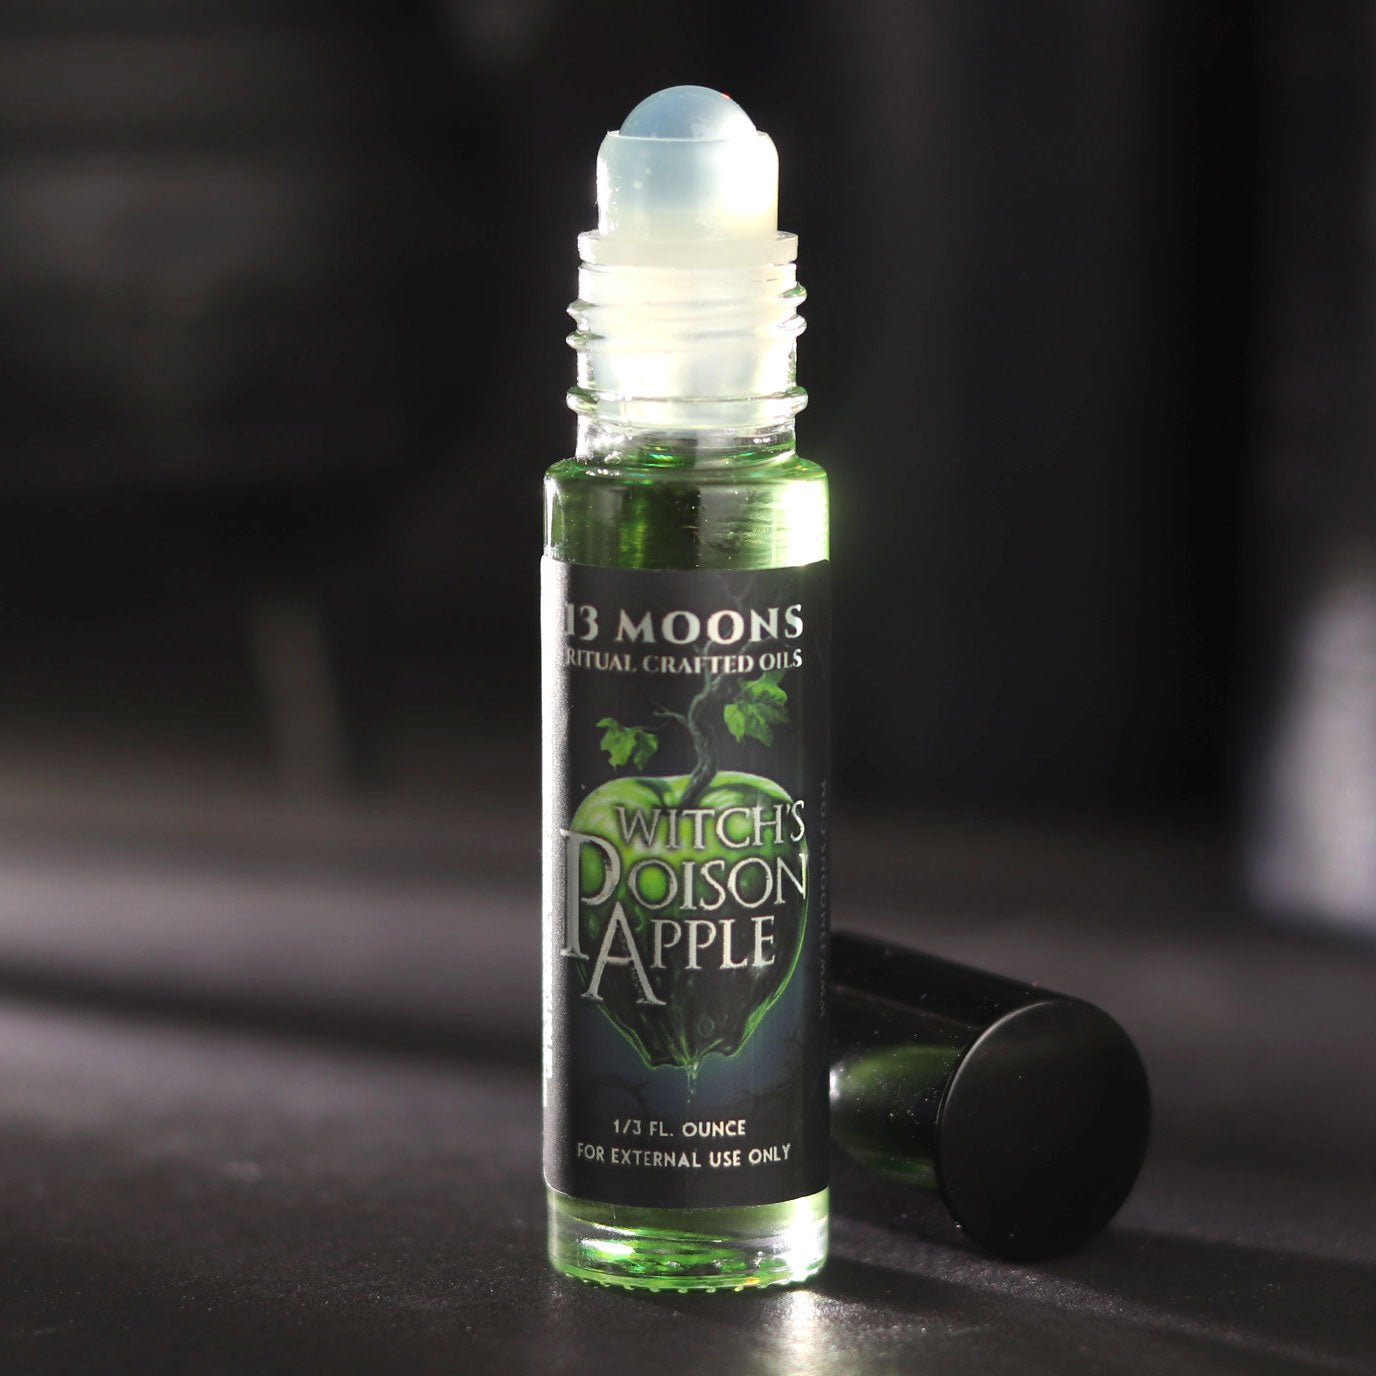 Witch's Poison Apple Ritual Crafted Oil by 13 Moons - 13 Moons